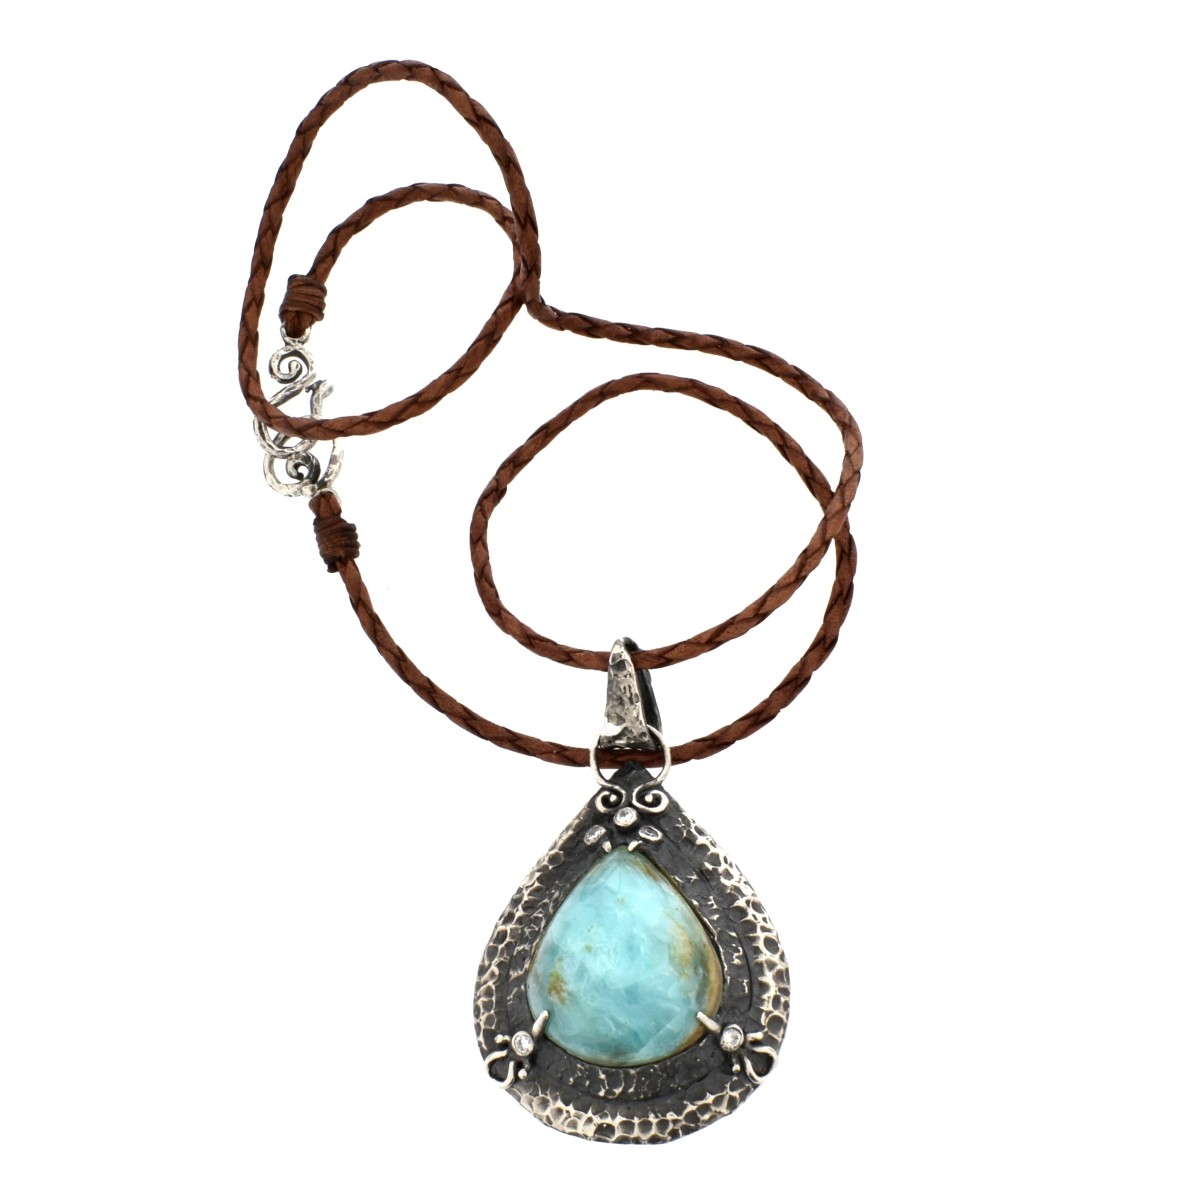 Turquoise, Diamond and Siver Necklace